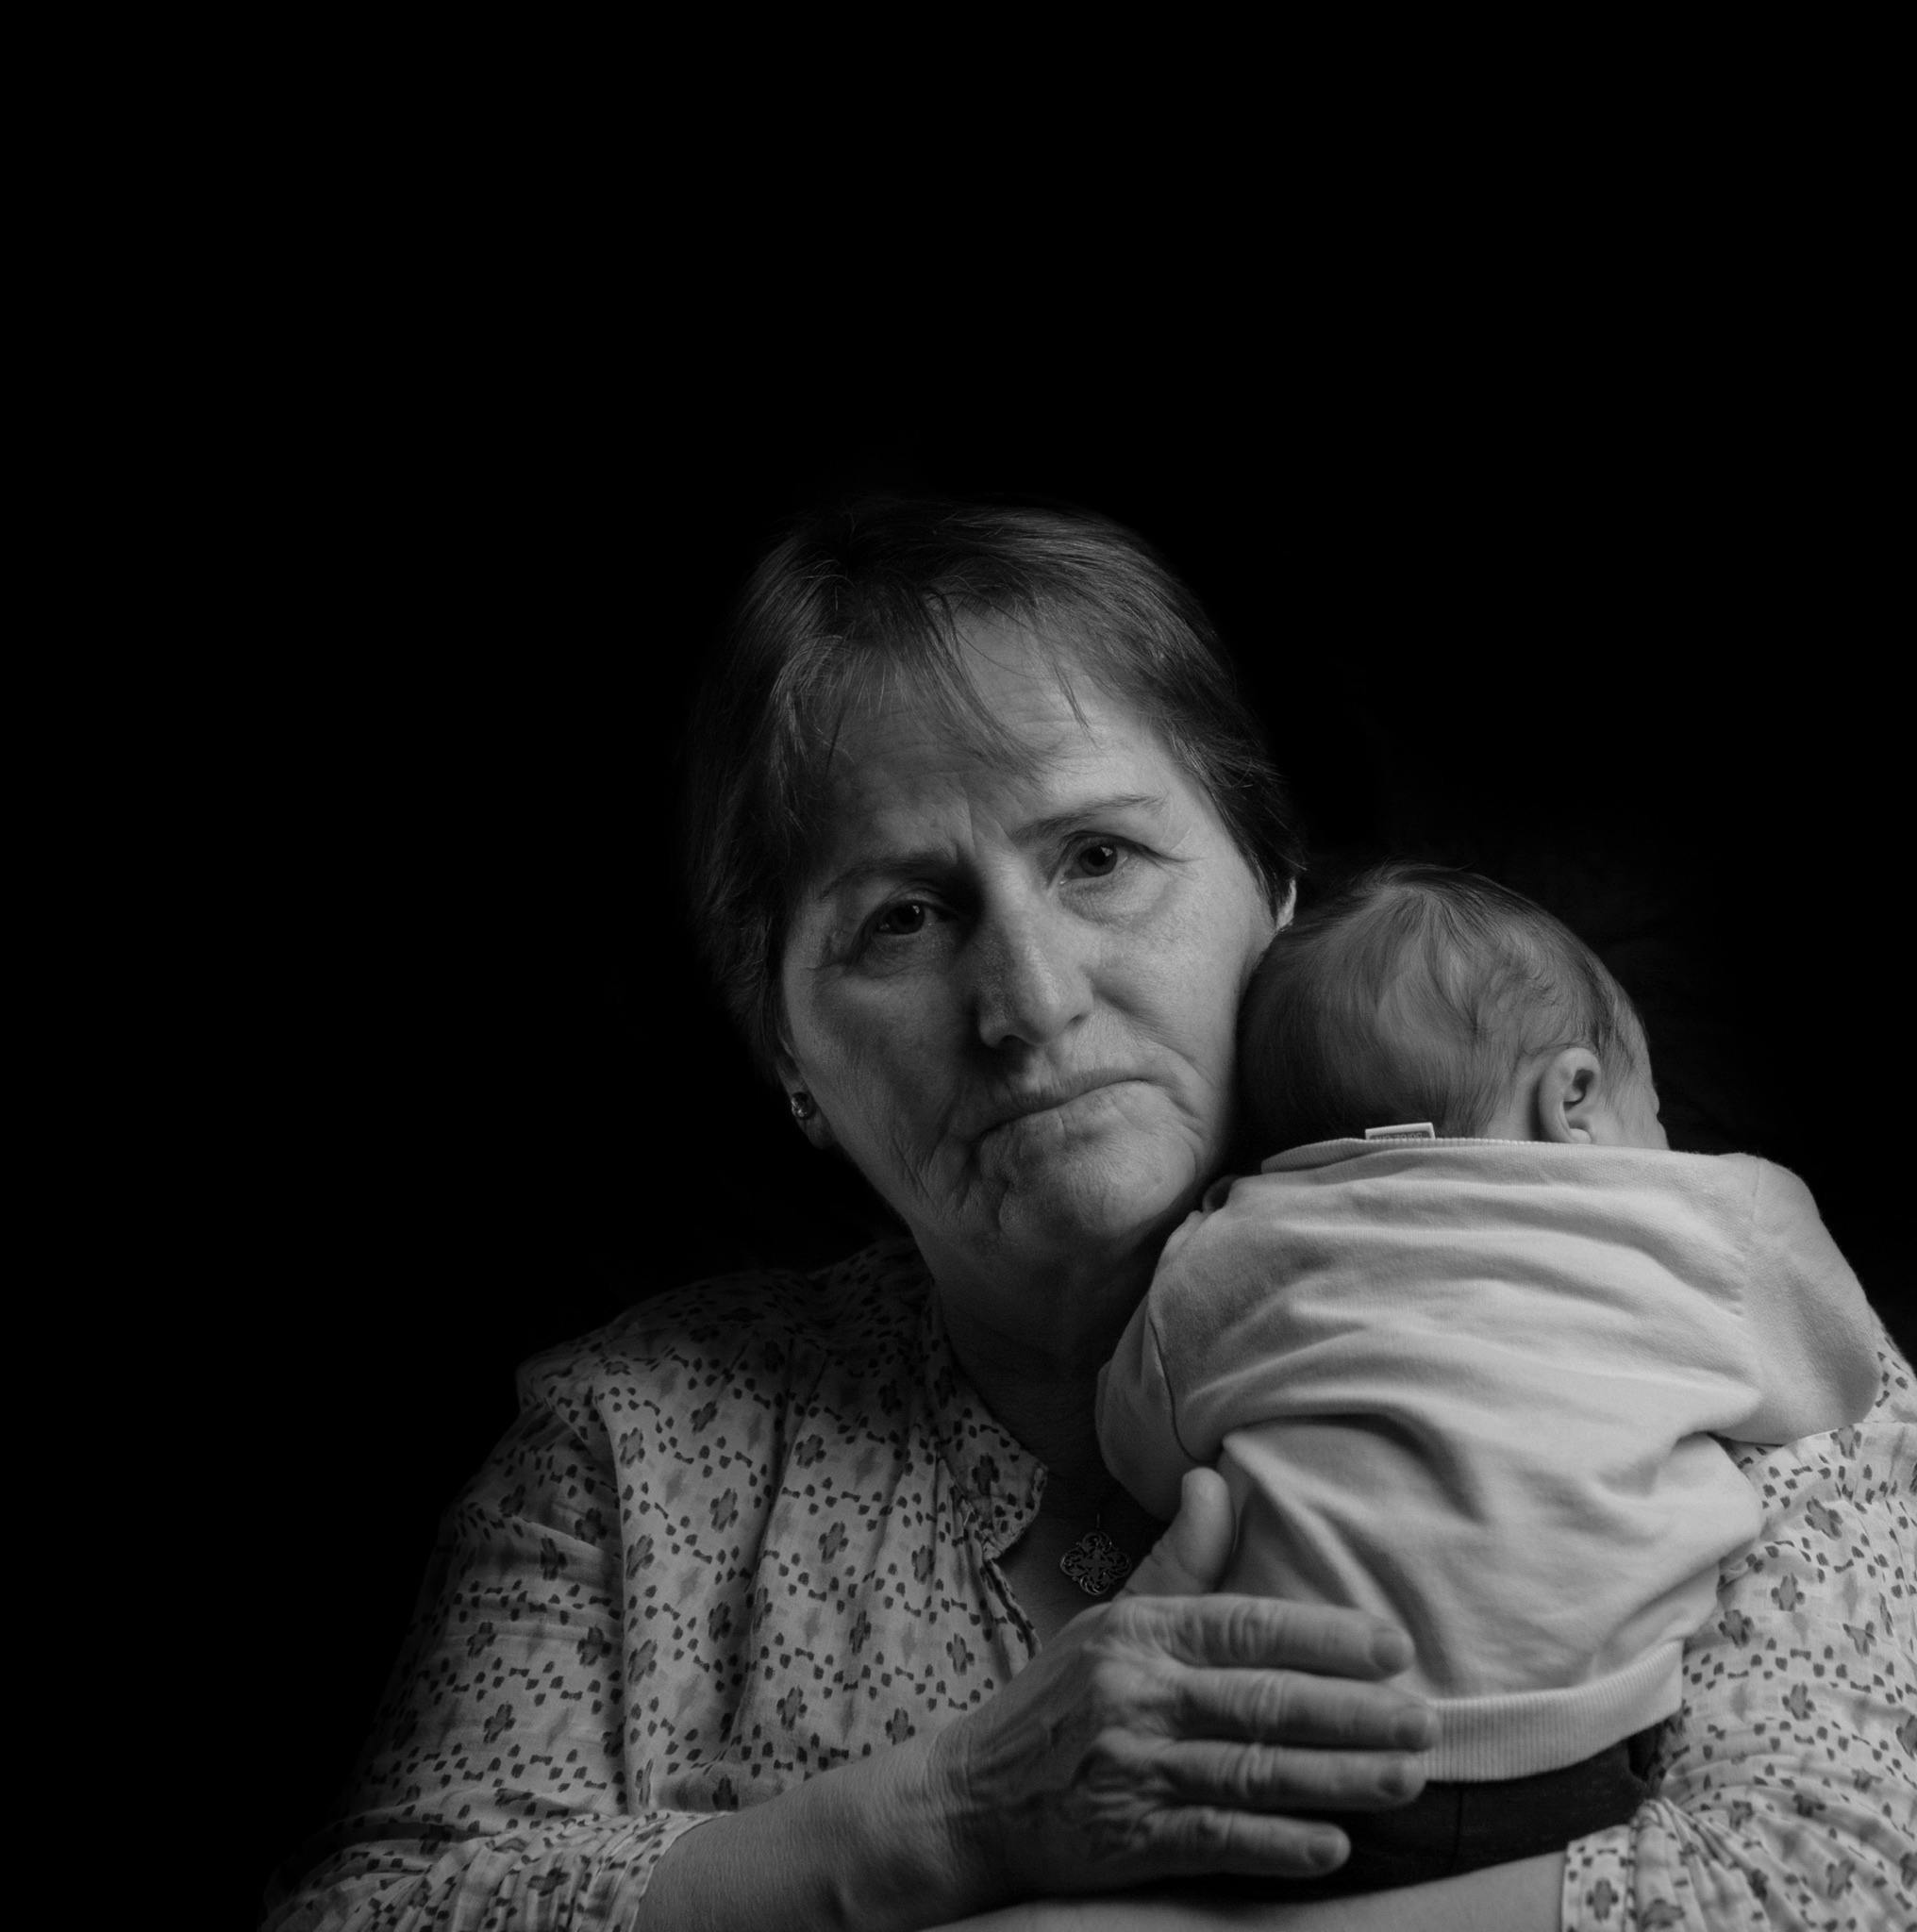 An upset senior woman holding a baby | Source: Pexels